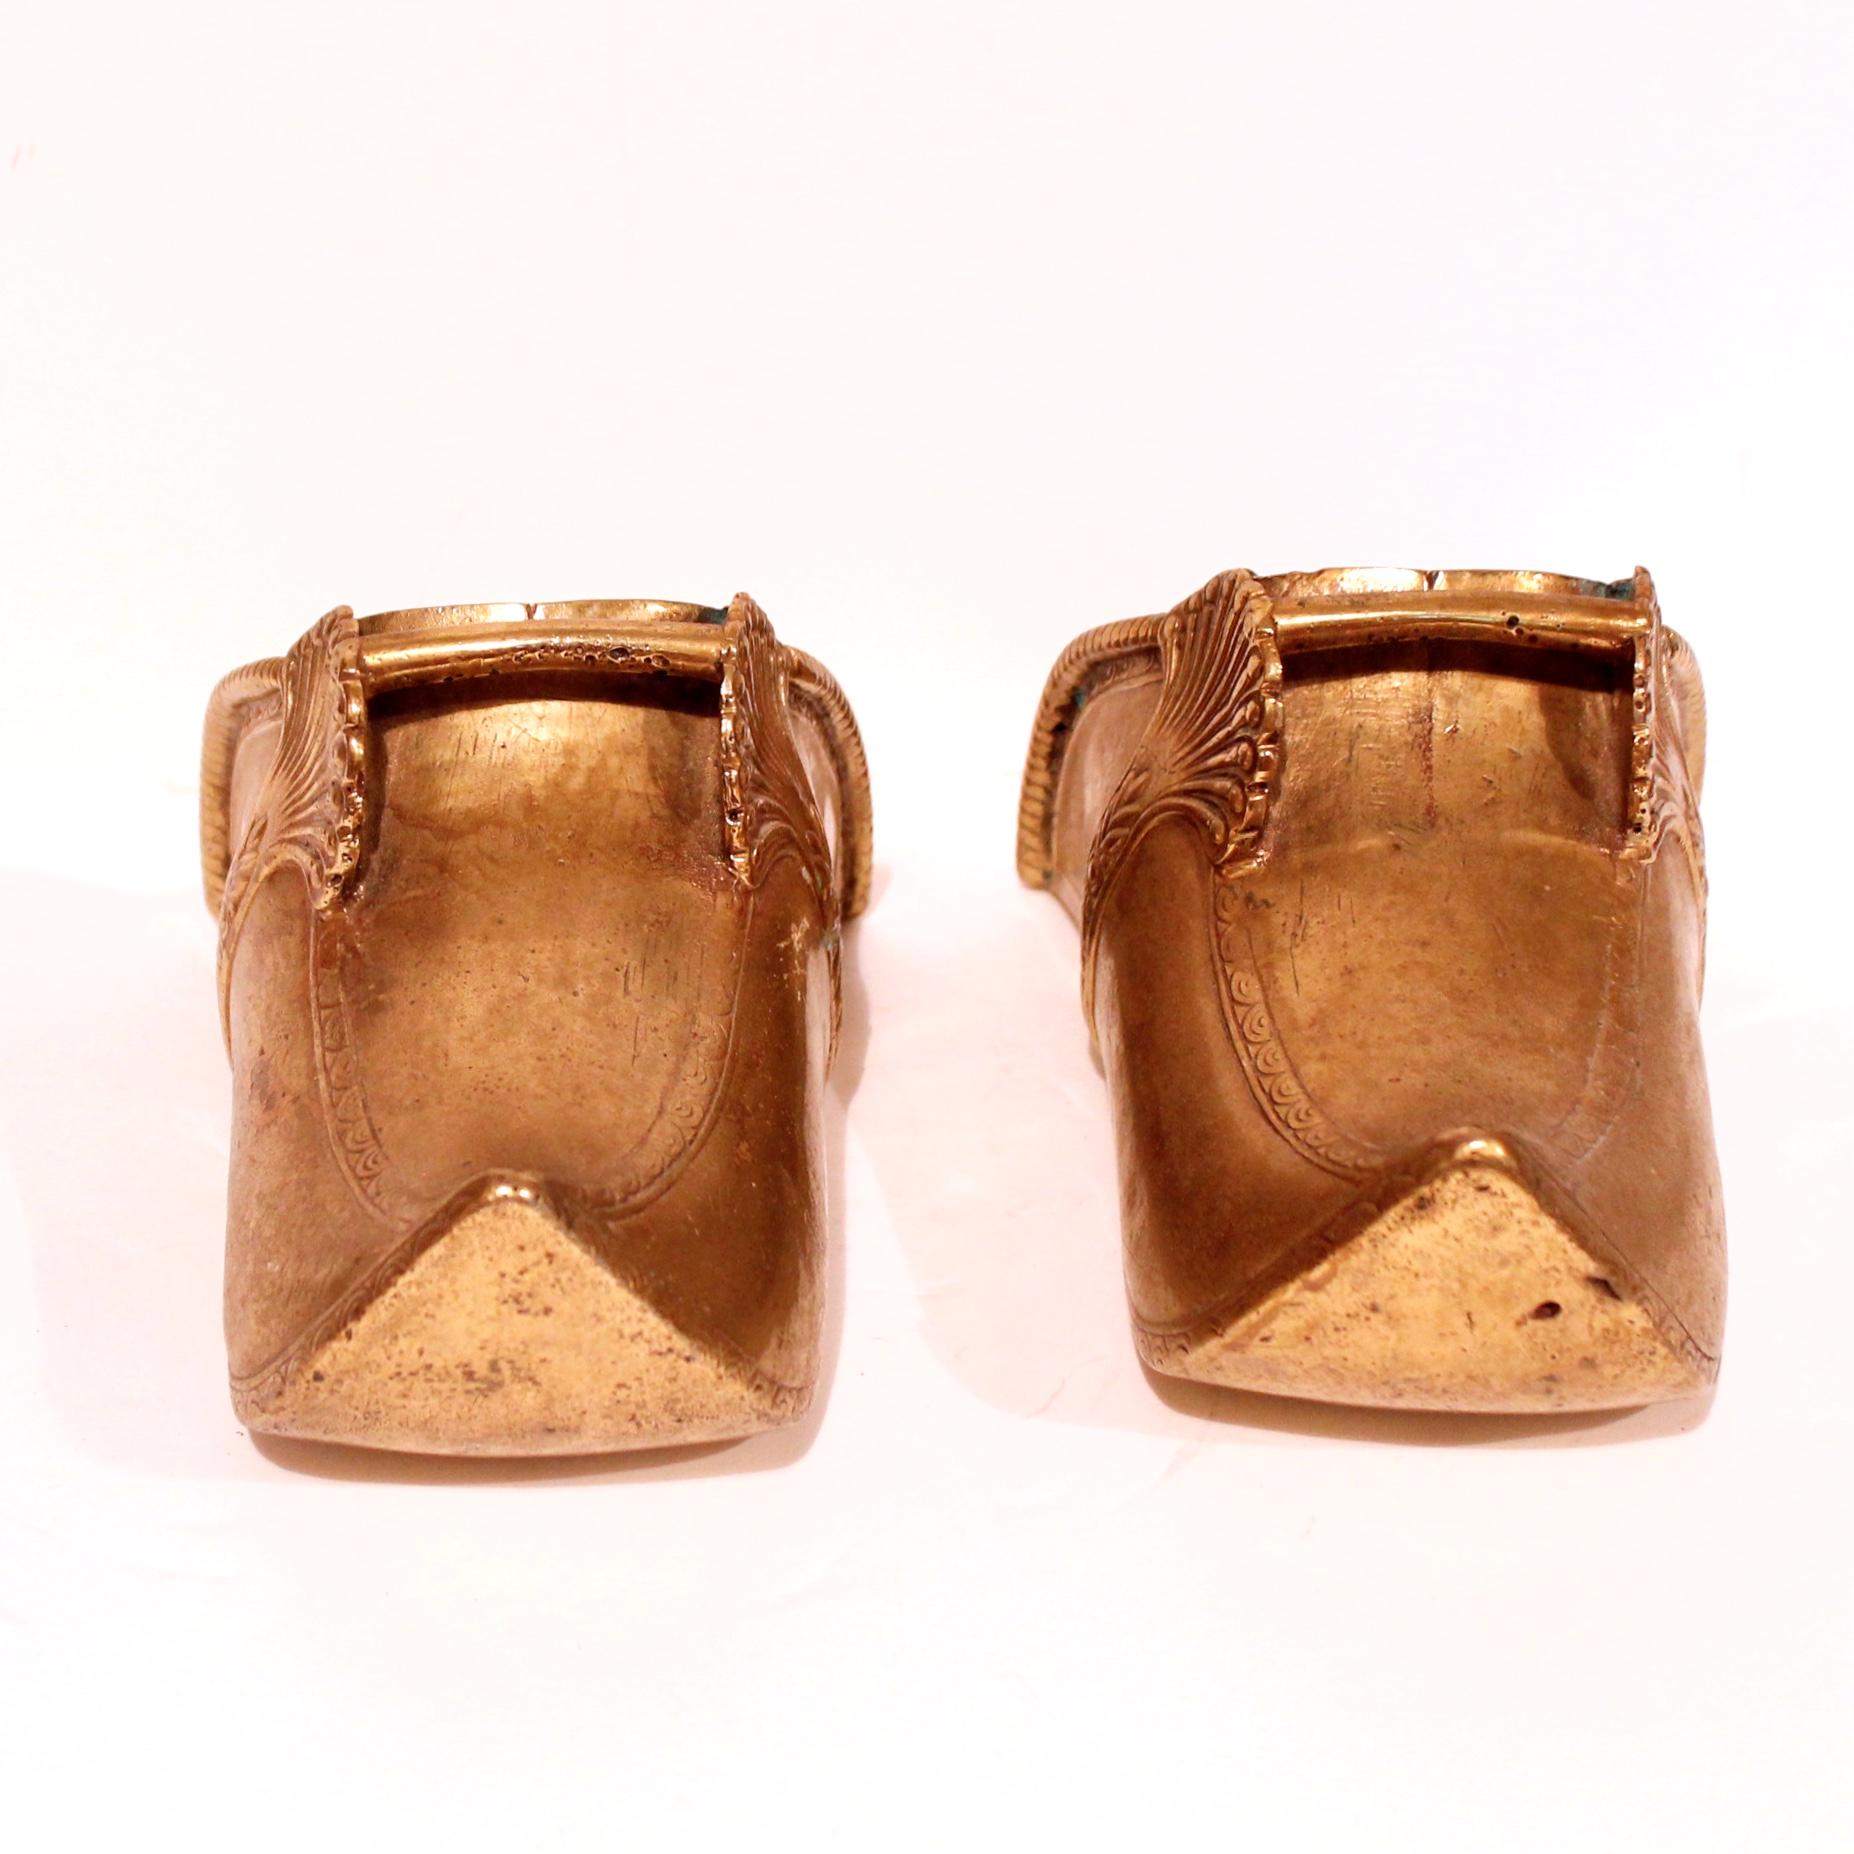 Cast Pair Of Brass Stirrups, 19th Century, Spanish Colonial For Sale